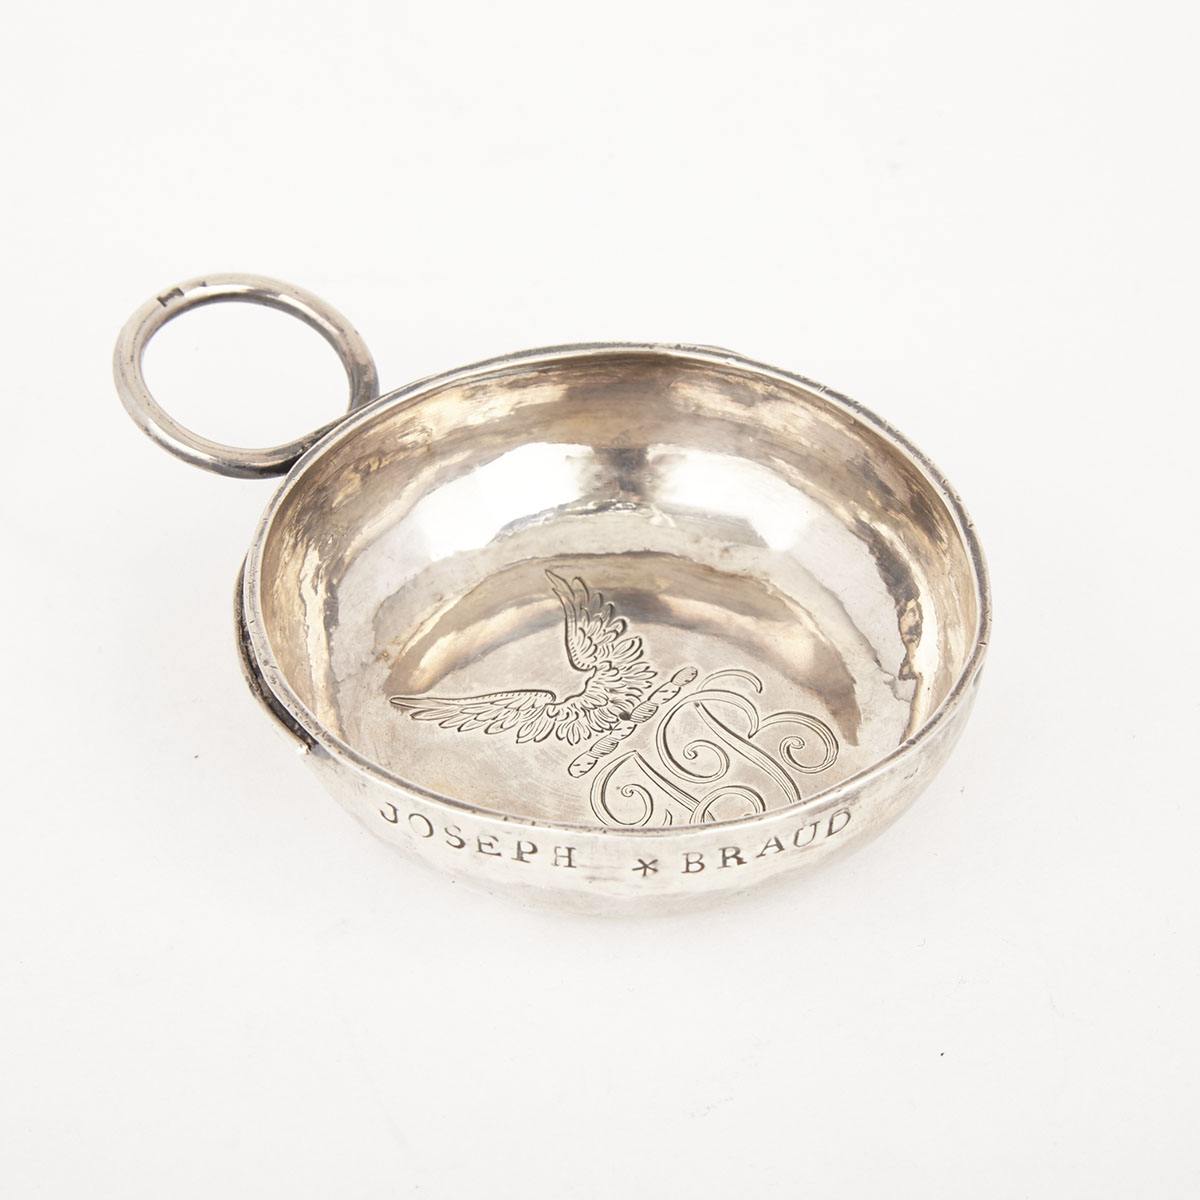 French Silver Wine Taster, Charles Caffin, Thouars, c.1777-1781